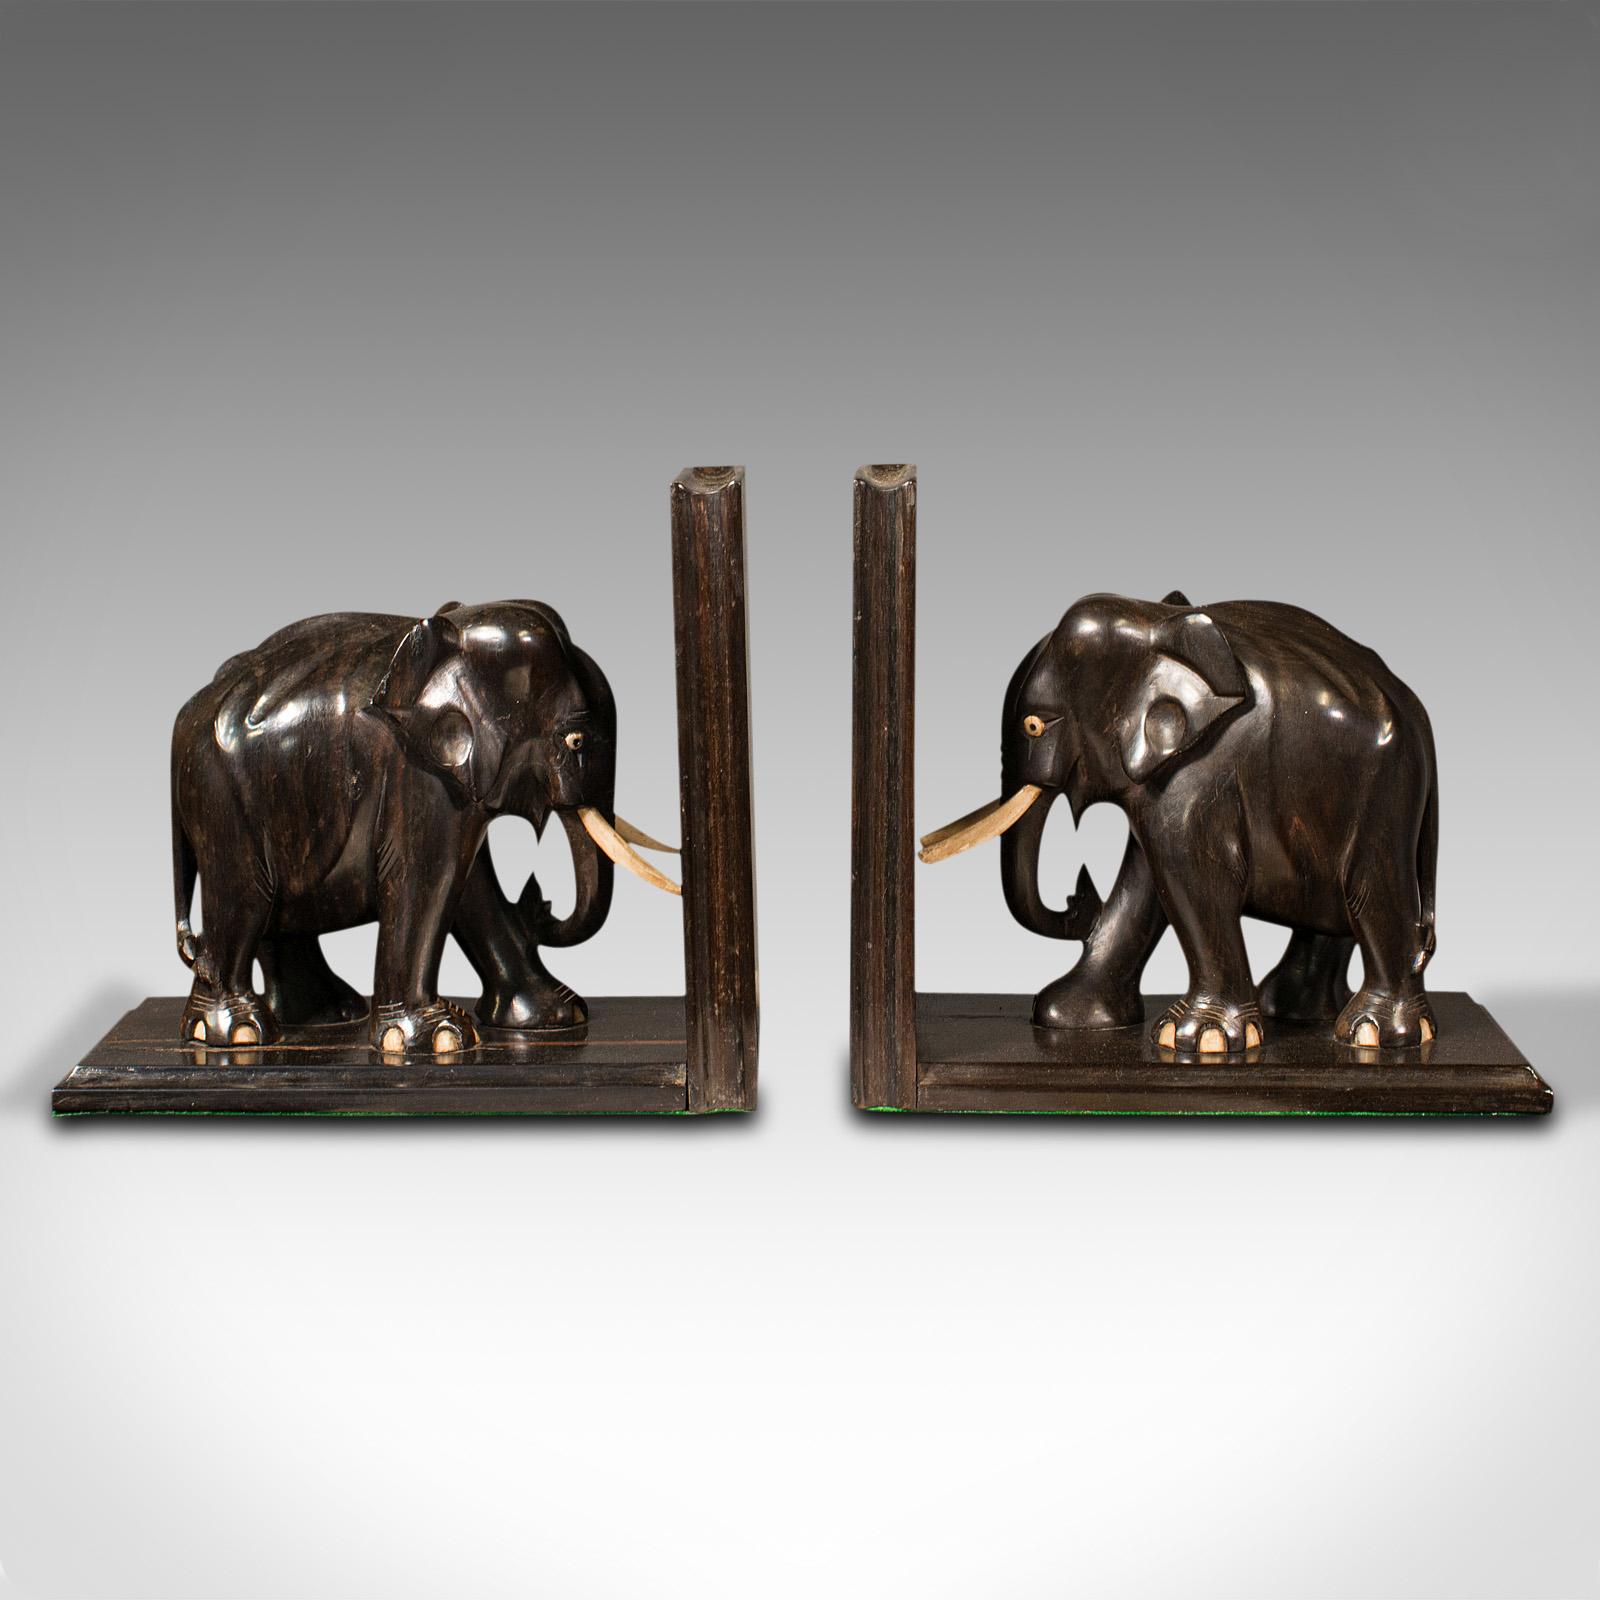 This is a pair of antique elephant bookends. An Anglo-Indian, ebony and bone decorative novel or book rest, dating to the late Victorian period, circa 1890.

Offering excellent character and display appeal for the reader
Displaying a desirable